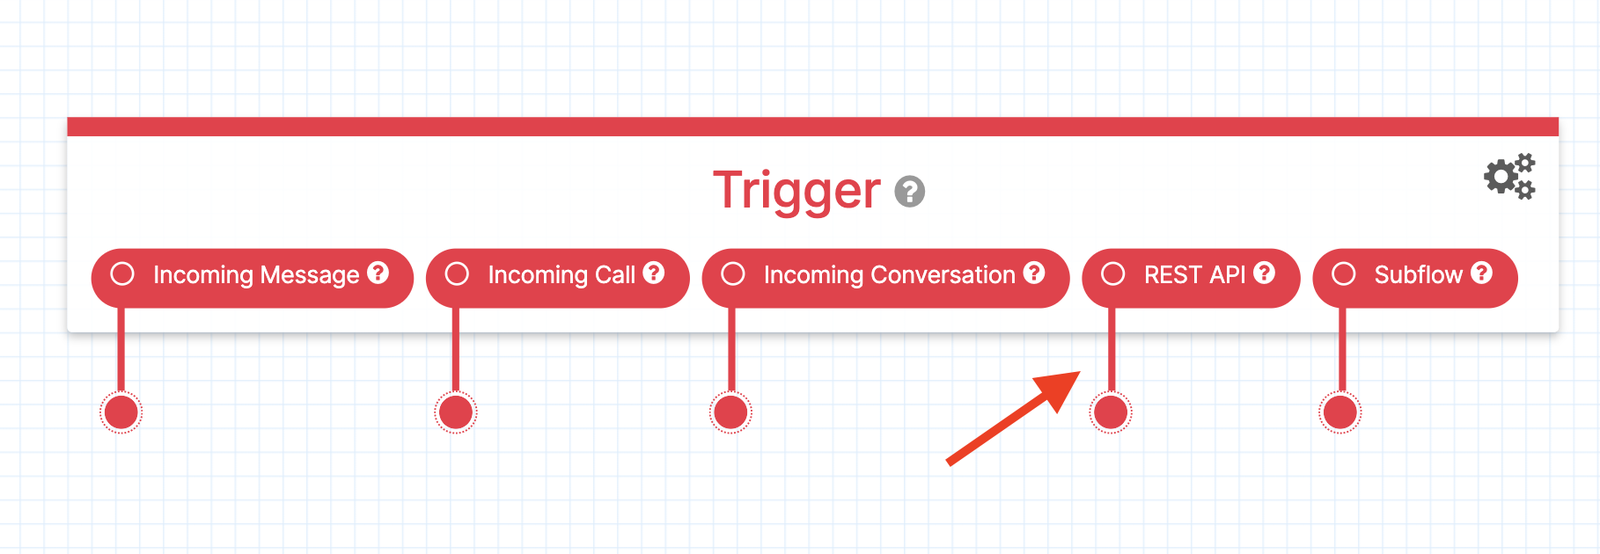 Twilio Studio Tutorial Appointment Reminders arrow pointing to REST API trigger within the Trigger (Start) Widget.